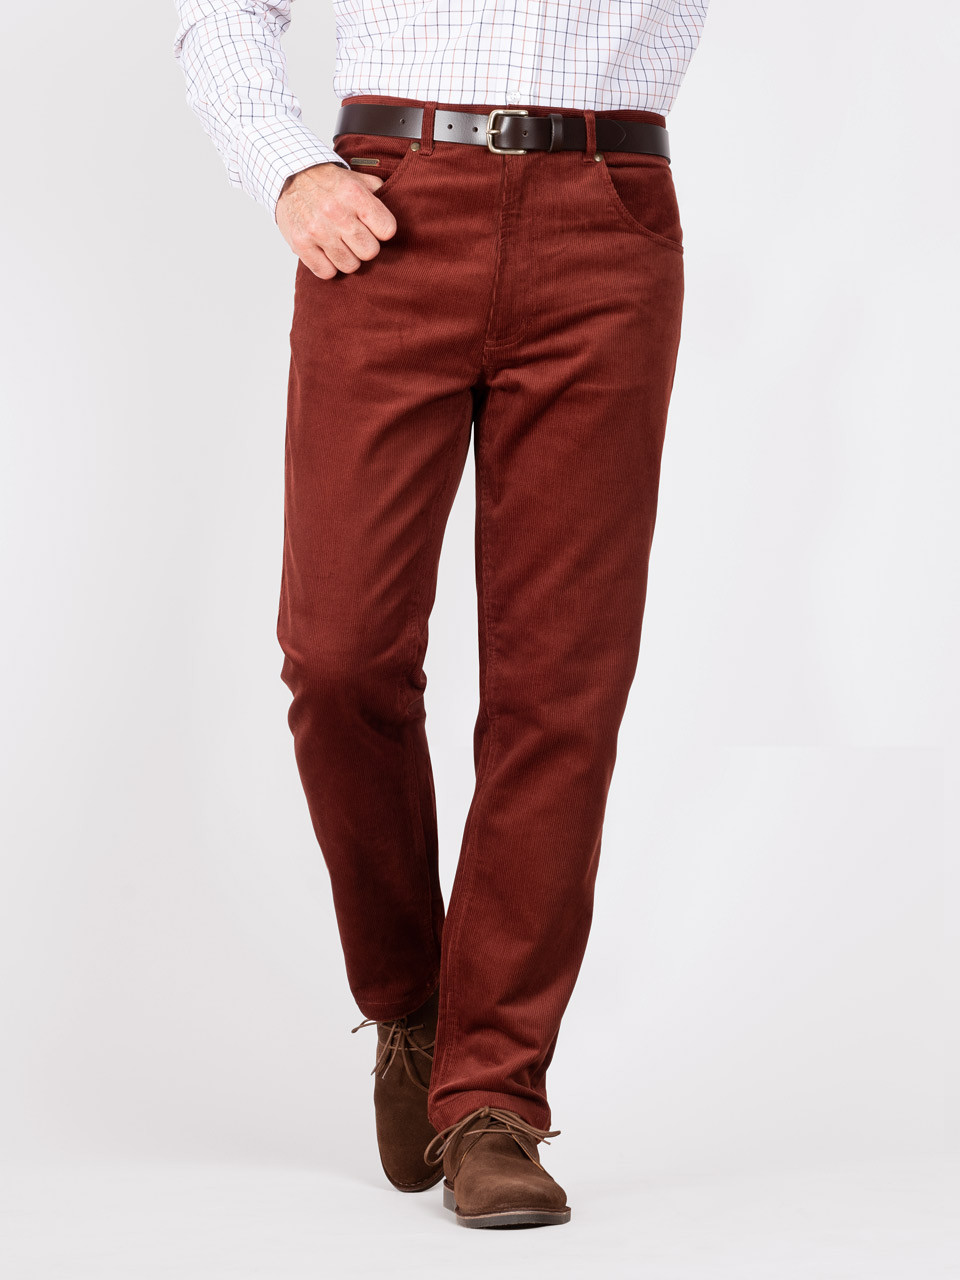 Brown Thick Corduroy Trousers - 8 Wales : Made To Measure Custom Jeans For  Men & Women, MakeYourOwnJeans®